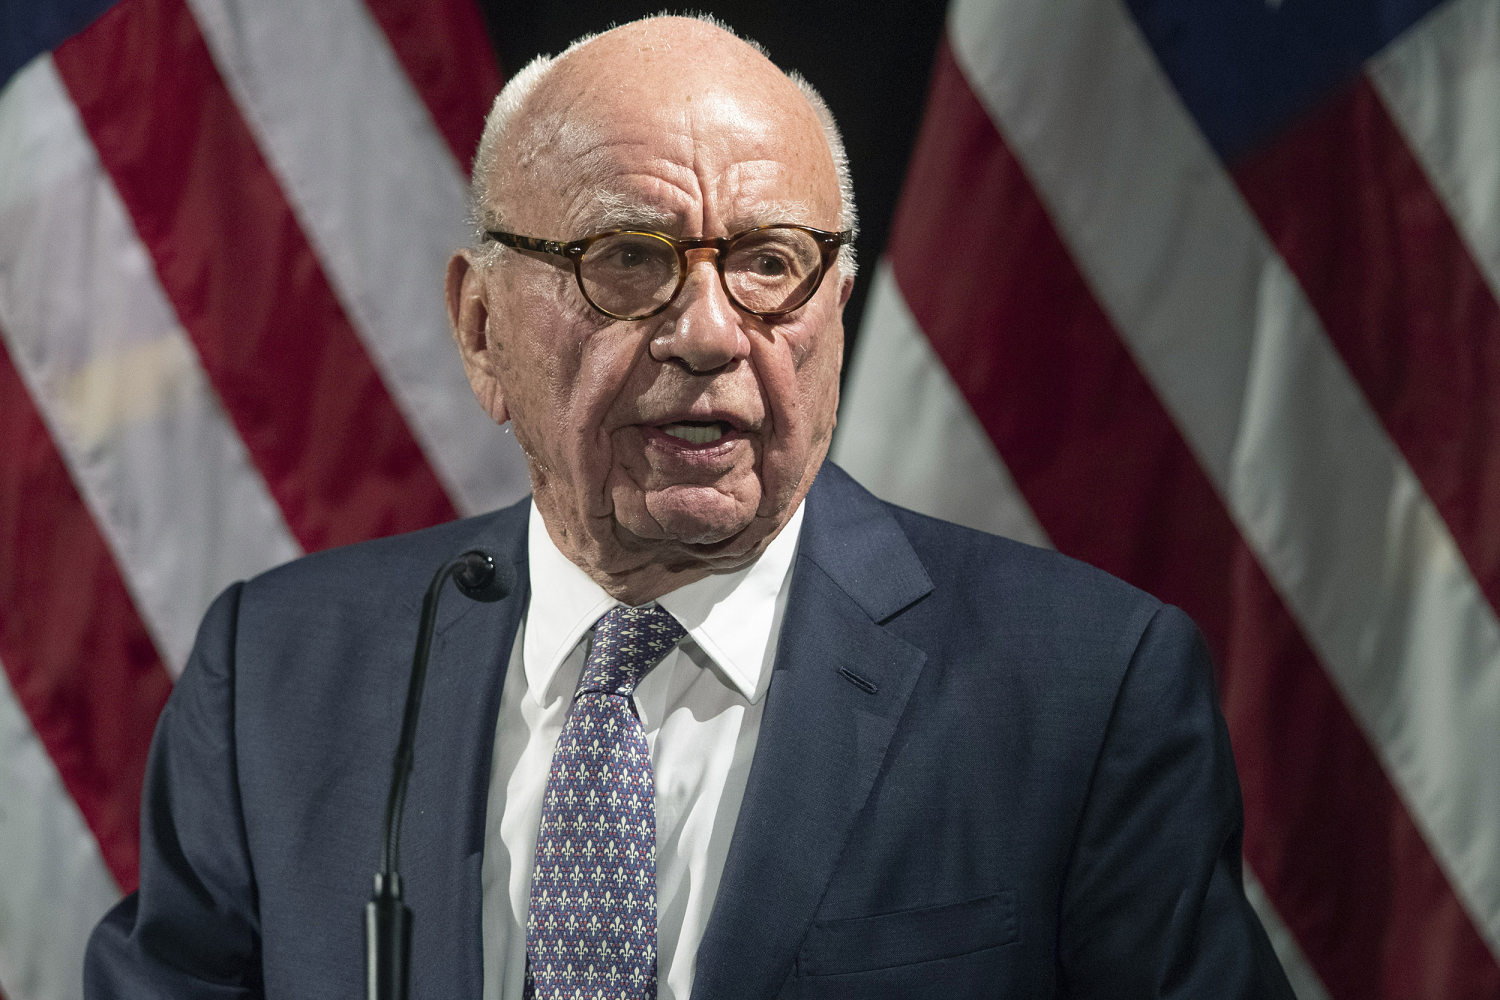 Rupert Murdoch to step down as chairman of Fox Corp. and News Corp.